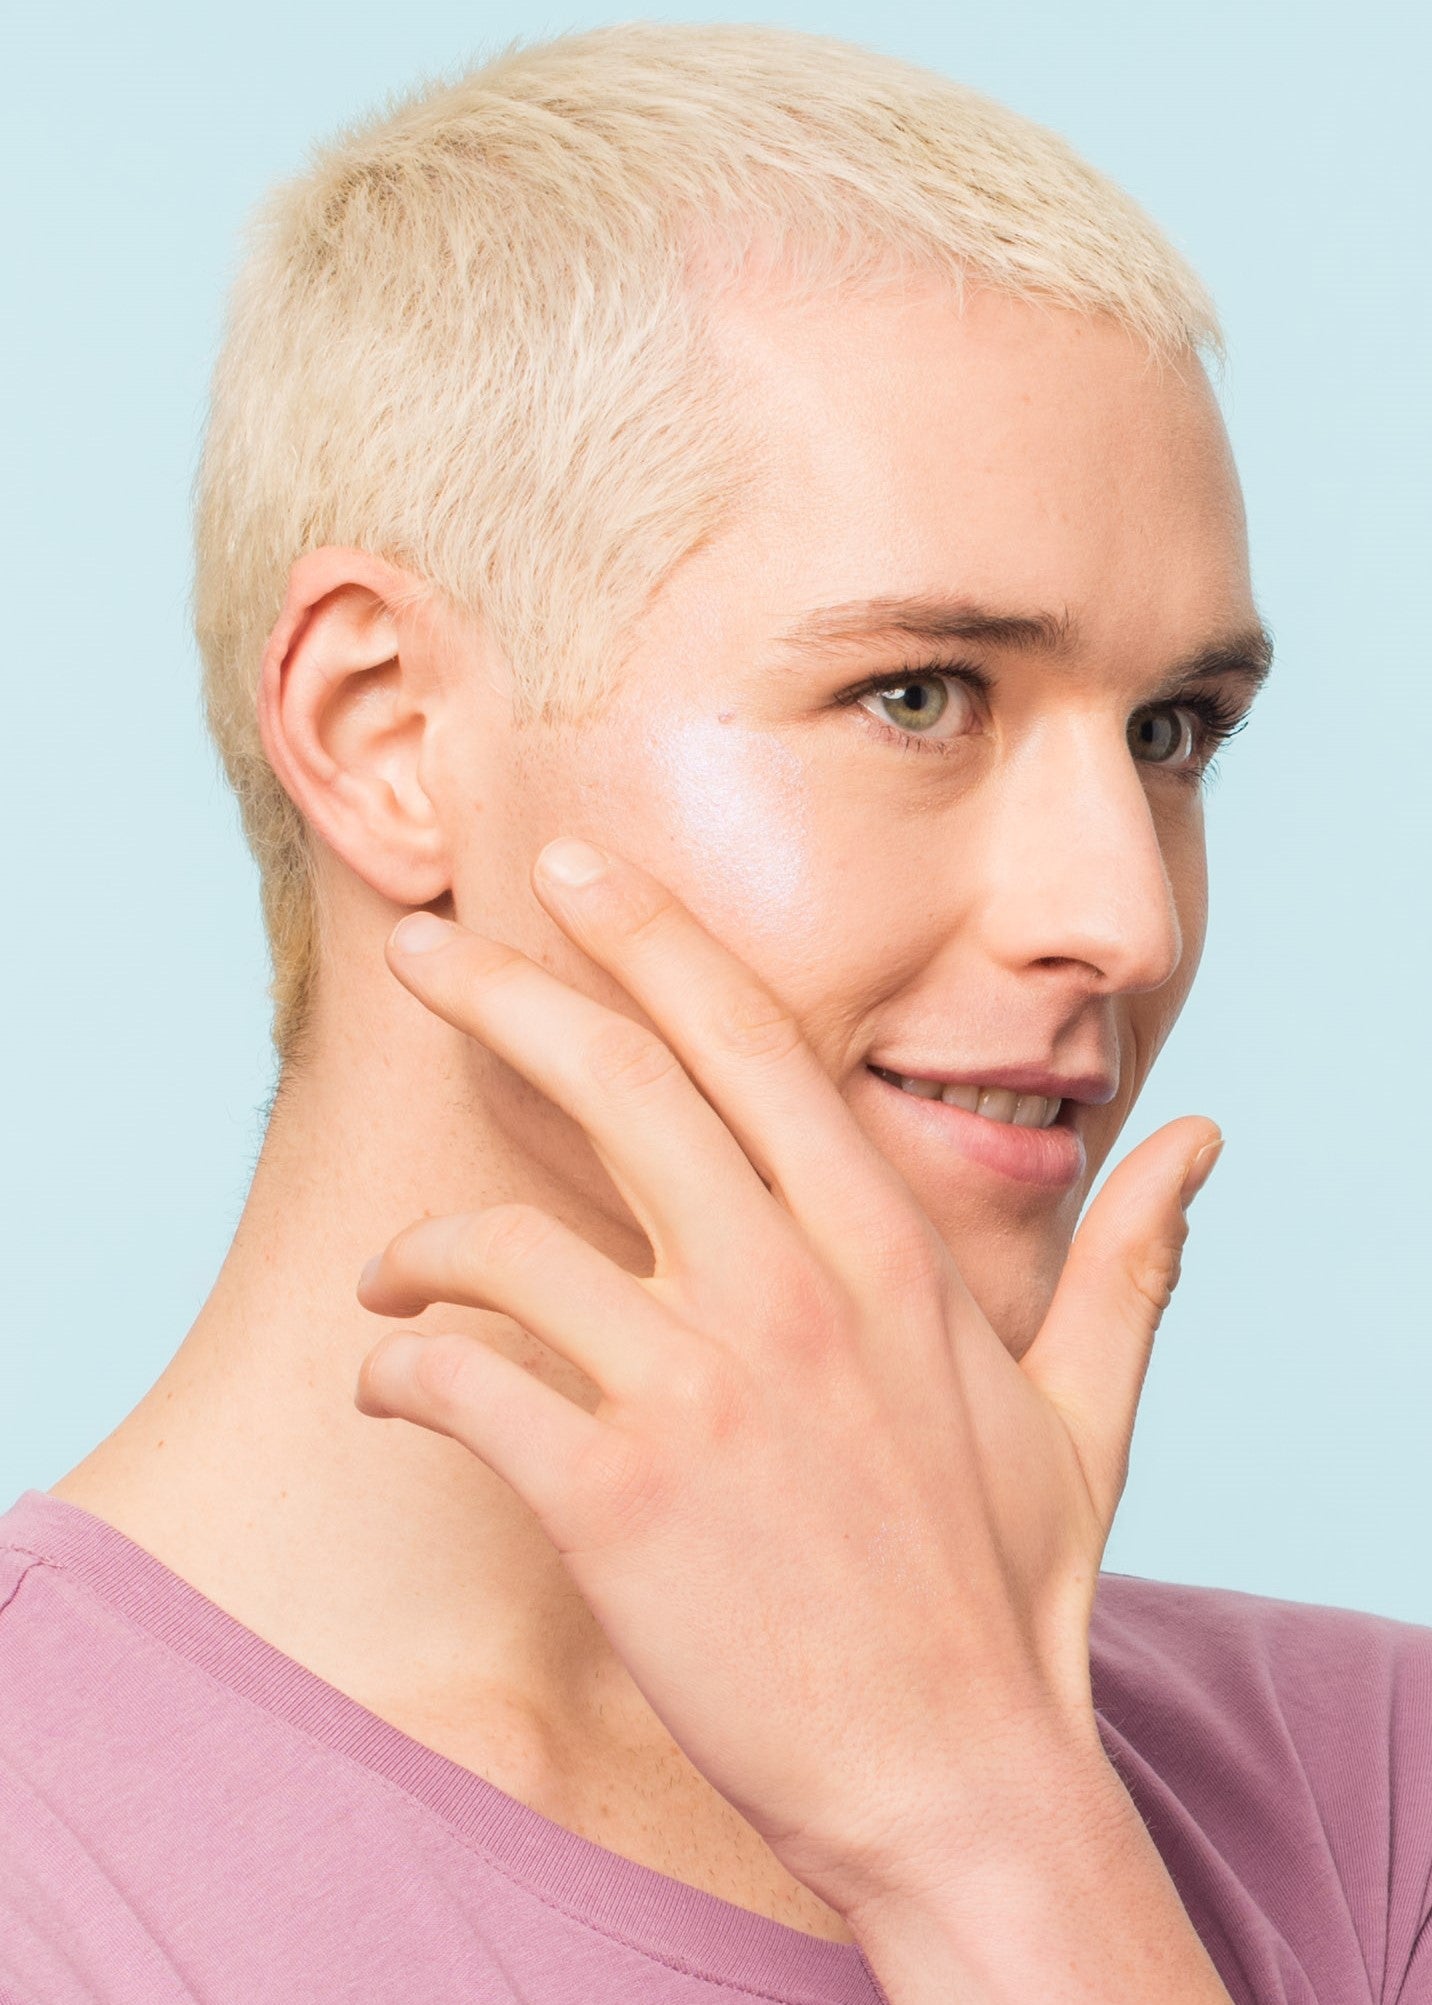 man happily applying jelly highlighter on the right side of his cheek with fingers